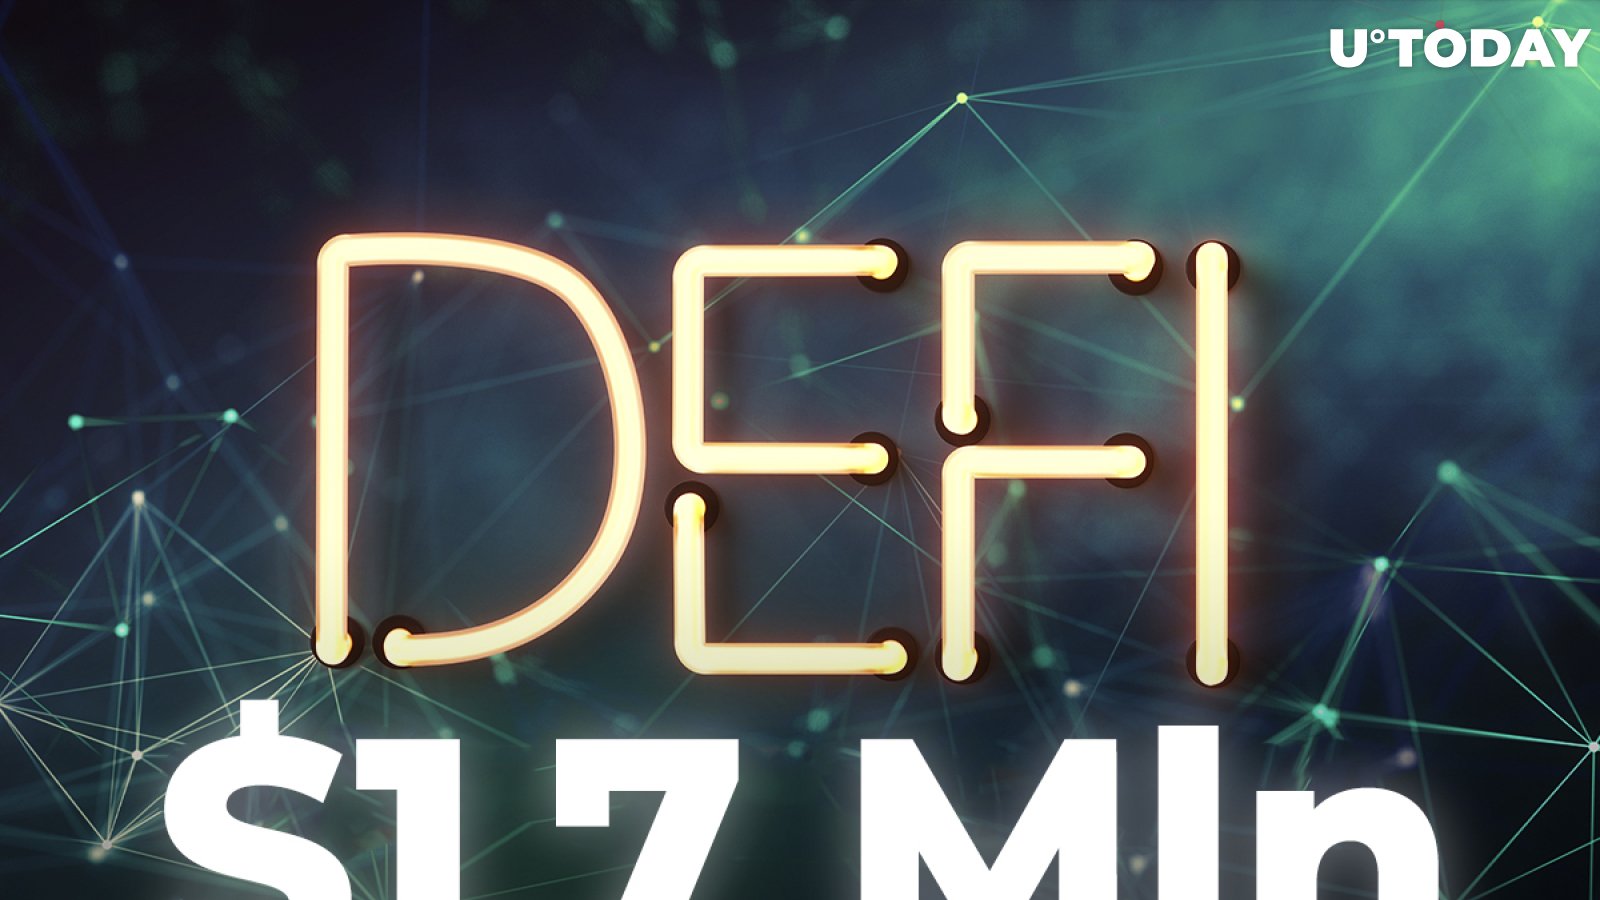 Celo-Based DeFi ReSource Finance Raises $1.7 Million to Support Web3 Businesses